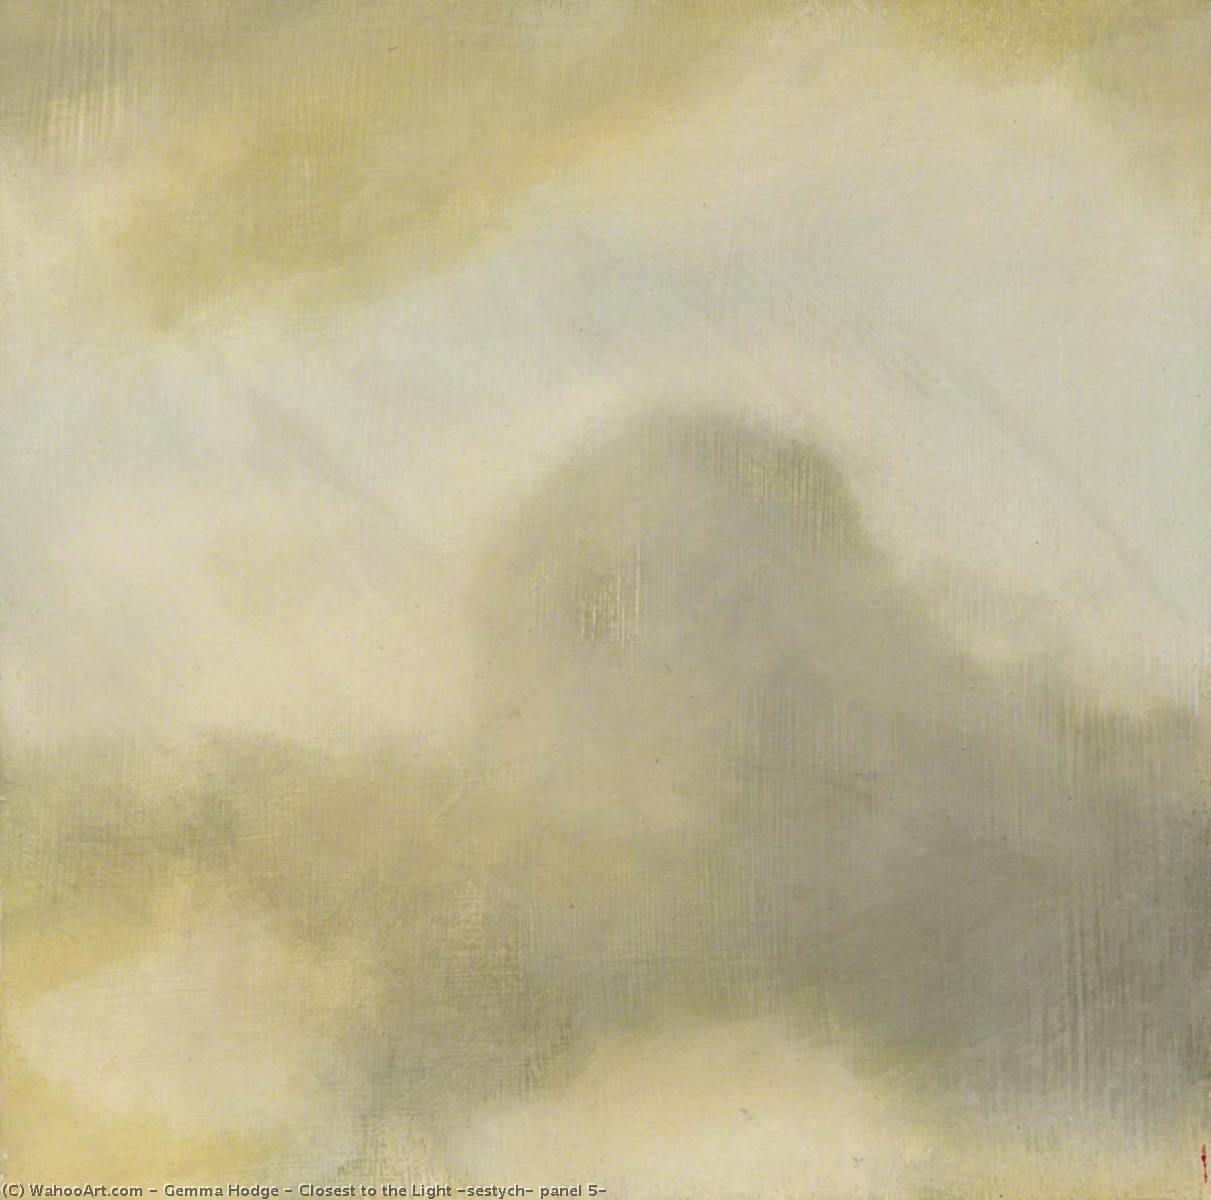 WikiOO.org - Encyclopedia of Fine Arts - Maalaus, taideteos Gemma Hodge - Closest to the Light (sestych, panel 5)